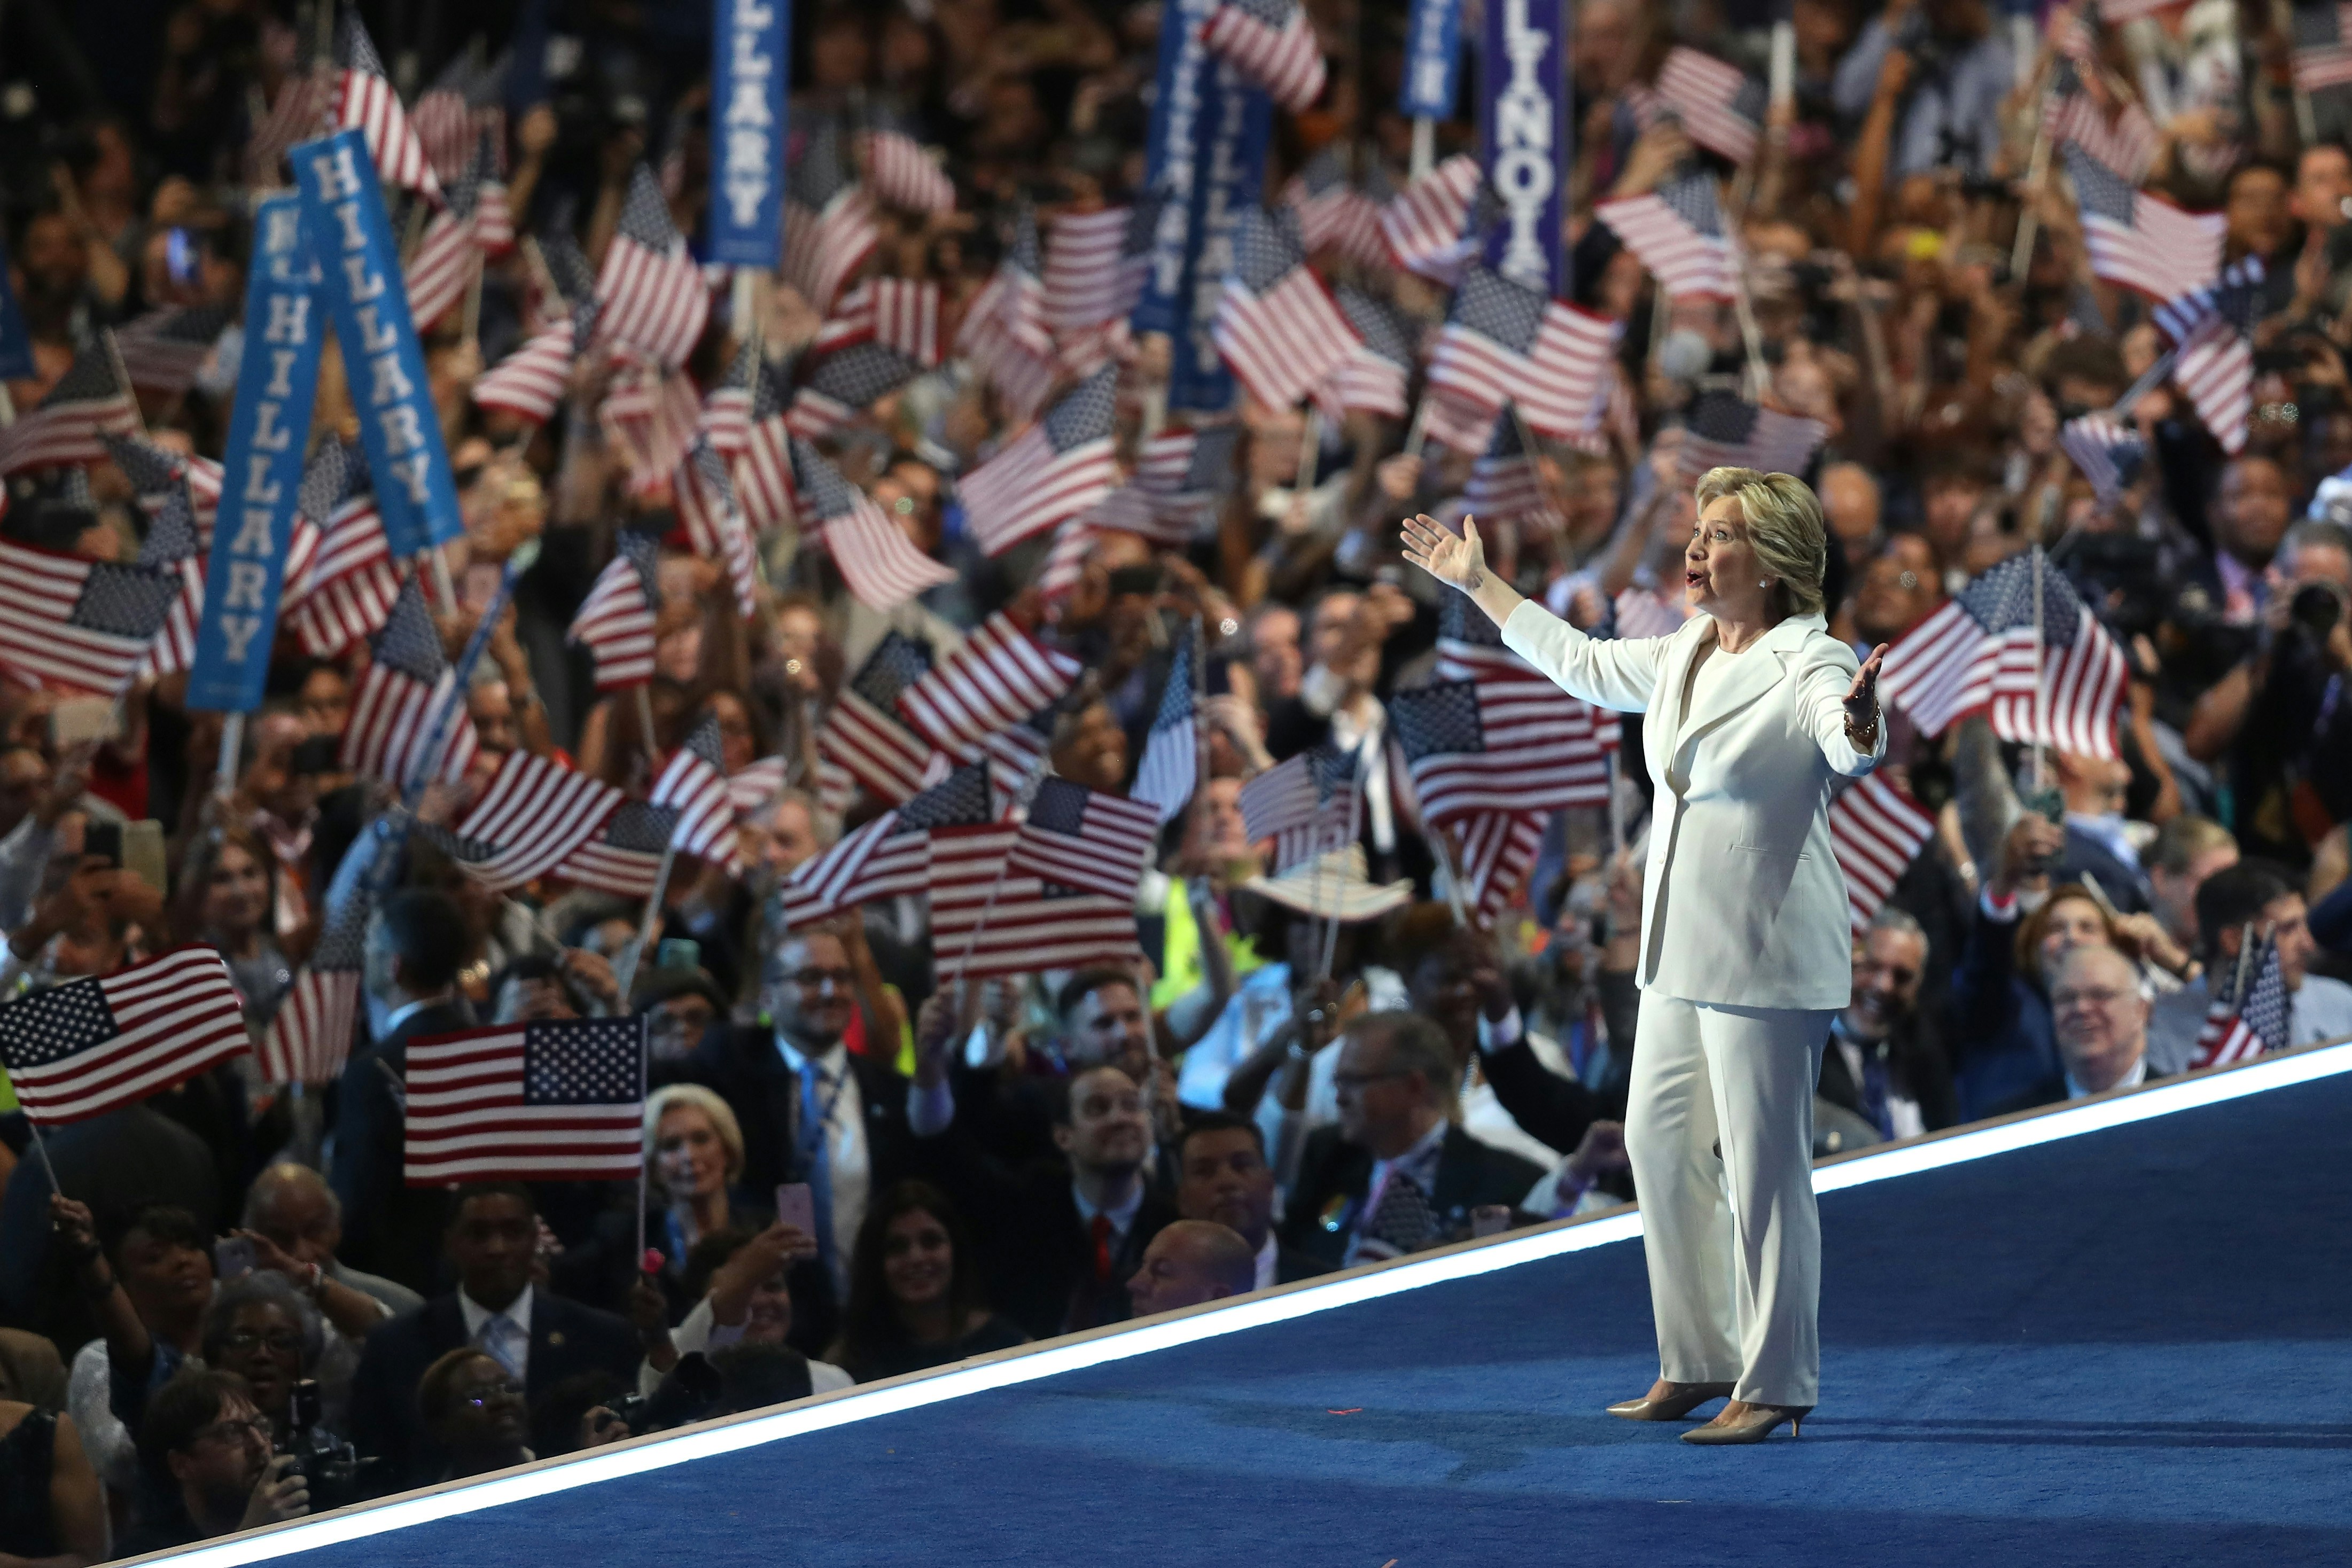 PHILADELPHIA, PA - JULY 28:  Democratic presidential nominee Hillary Clinton acknowledges the crowd as she arrives on stage during the fourth day of the Democratic National Convention at the Wells Fargo Center, July 28, 2016 in Philadelphia, Pennsylvania. Democratic presidential candidate Hillary Clinton received the number of votes needed to secure the party's nomination. An estimated 50,000 people are expected in Philadelphia, including hundreds of protesters and members of the media. The four-day Democratic National Convention kicked off July 25.  (Photo by Joe Raedle/Getty Images)